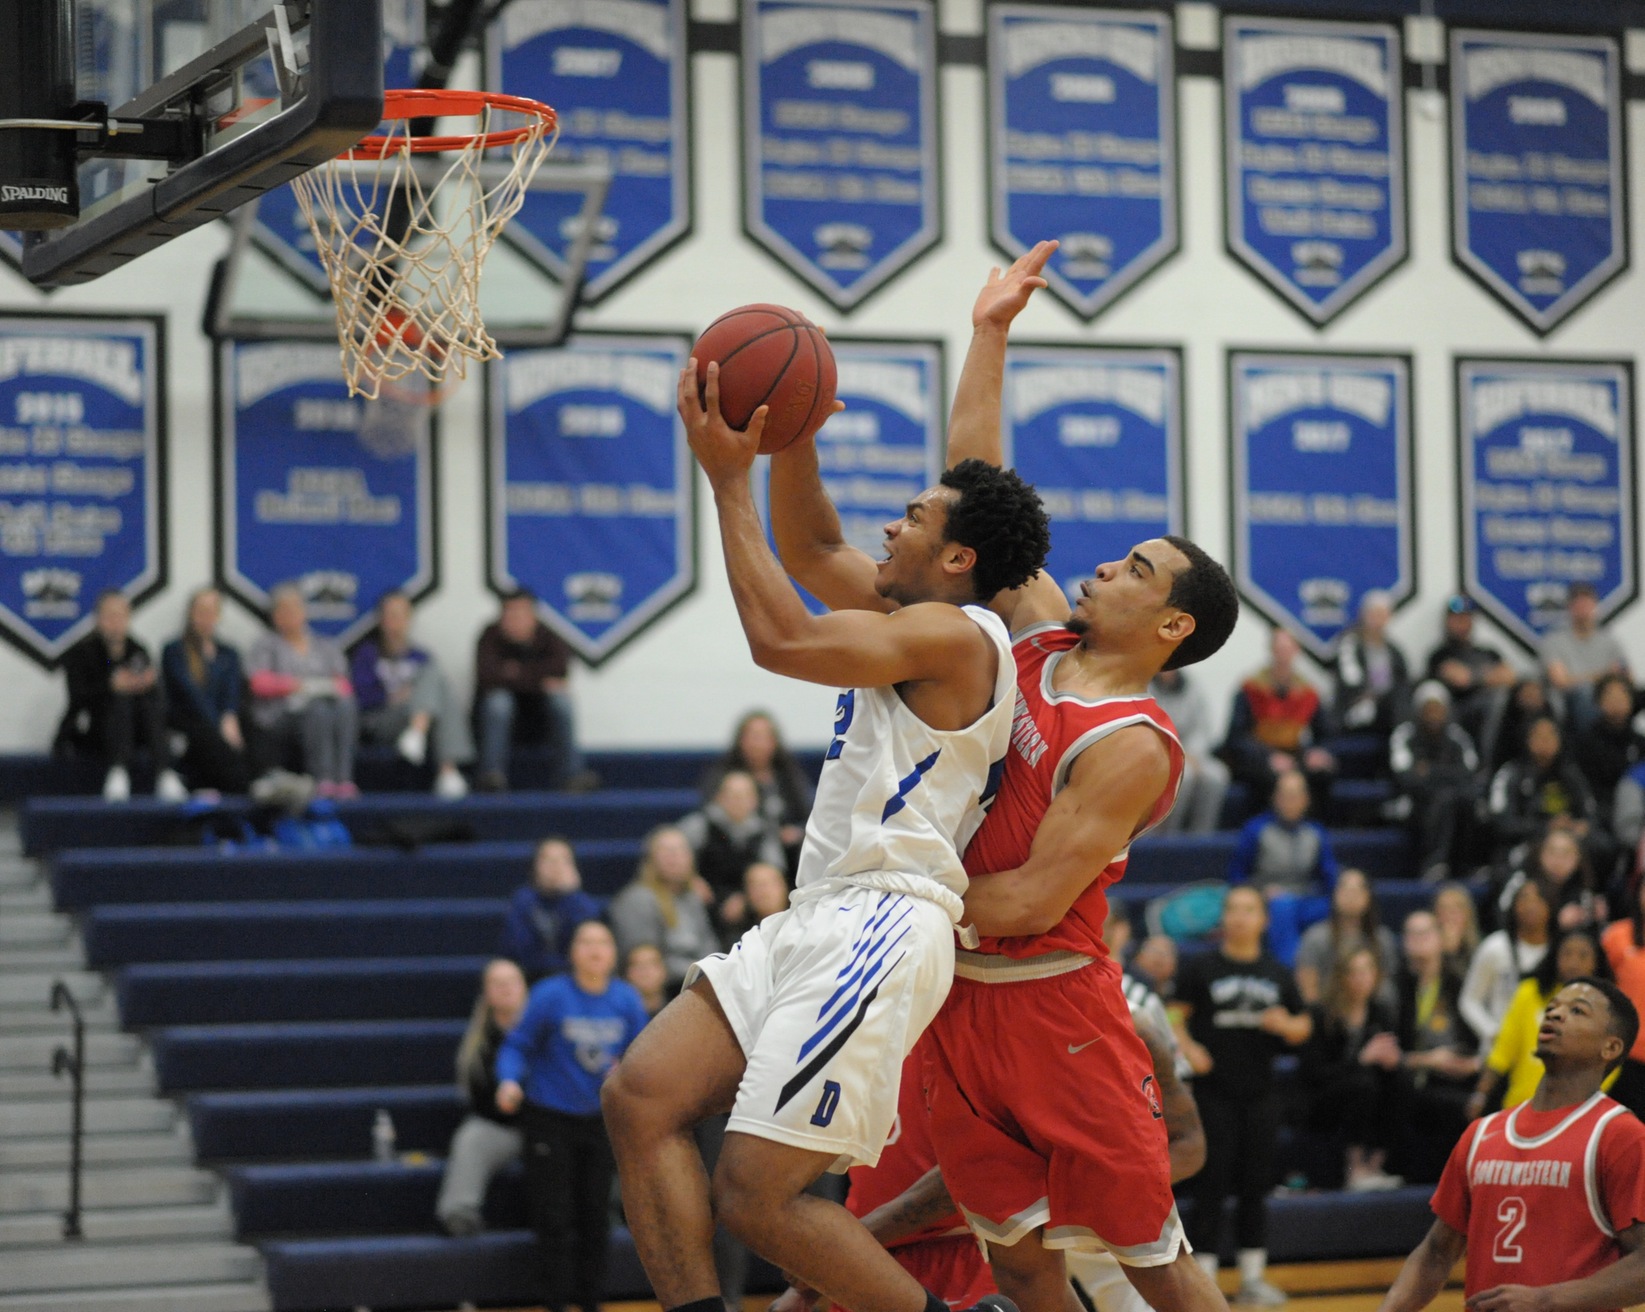 DMACC Men's Basketball Season Ends with 92-51 Loss to SWCC